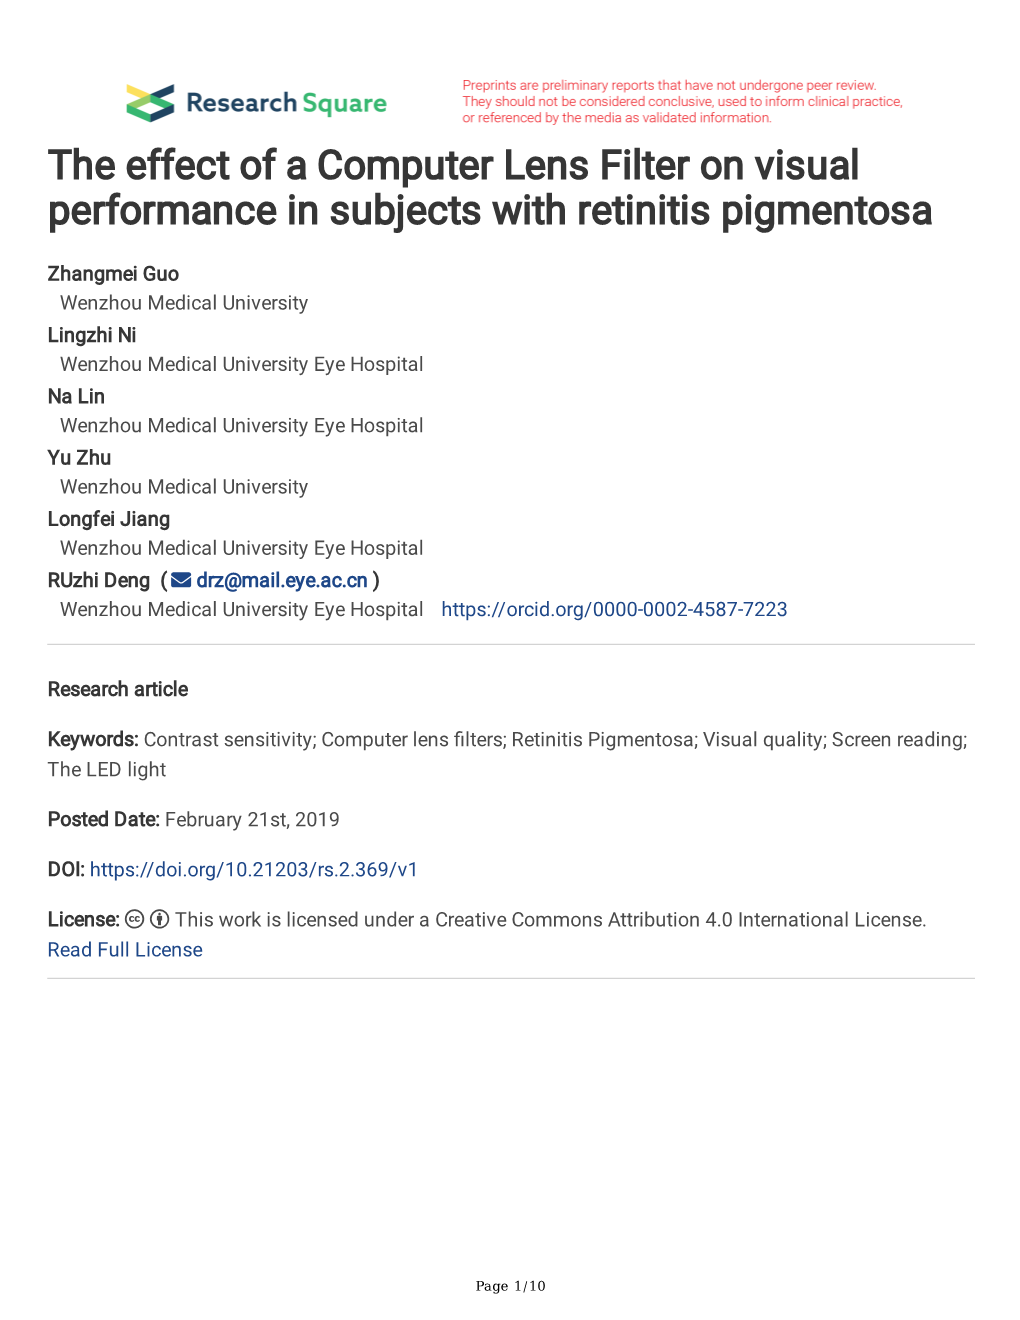 The Effect of a Computer Lens Filter on Visual Performance in Subjects with Retinitis Pigmentosa